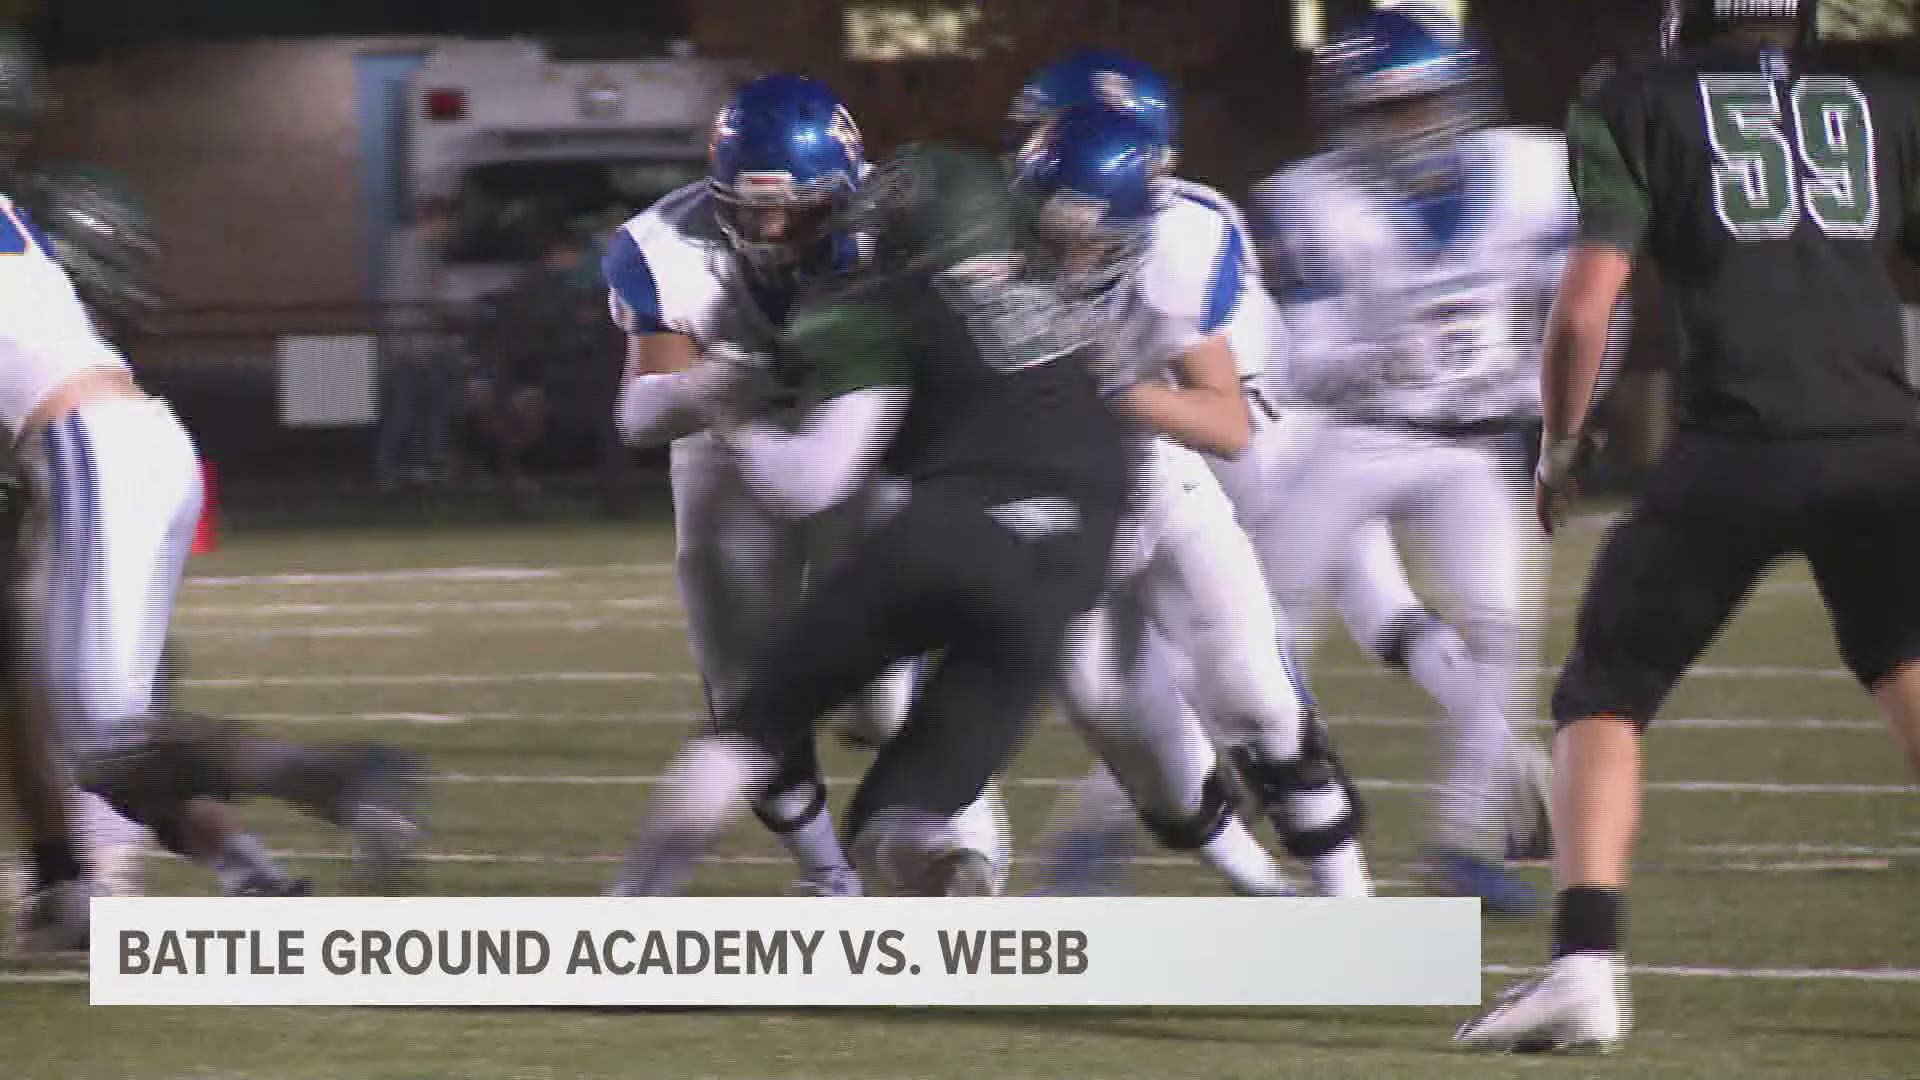 Webb's season comes to an end with a loss to BGA, 30-10.